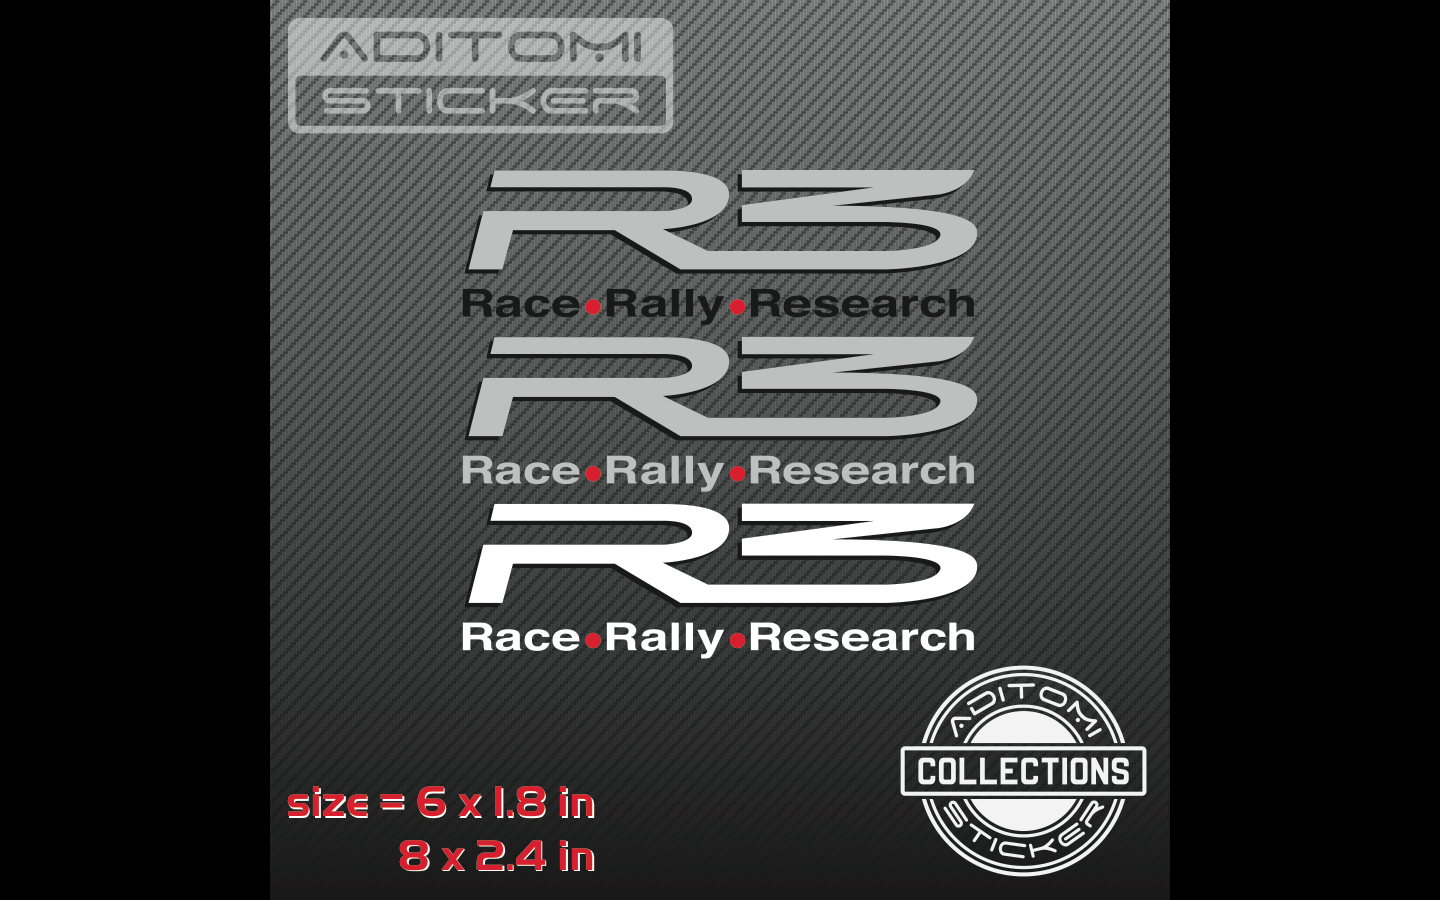 Aditomi sticker collection: R3 Race Rally Research sticker